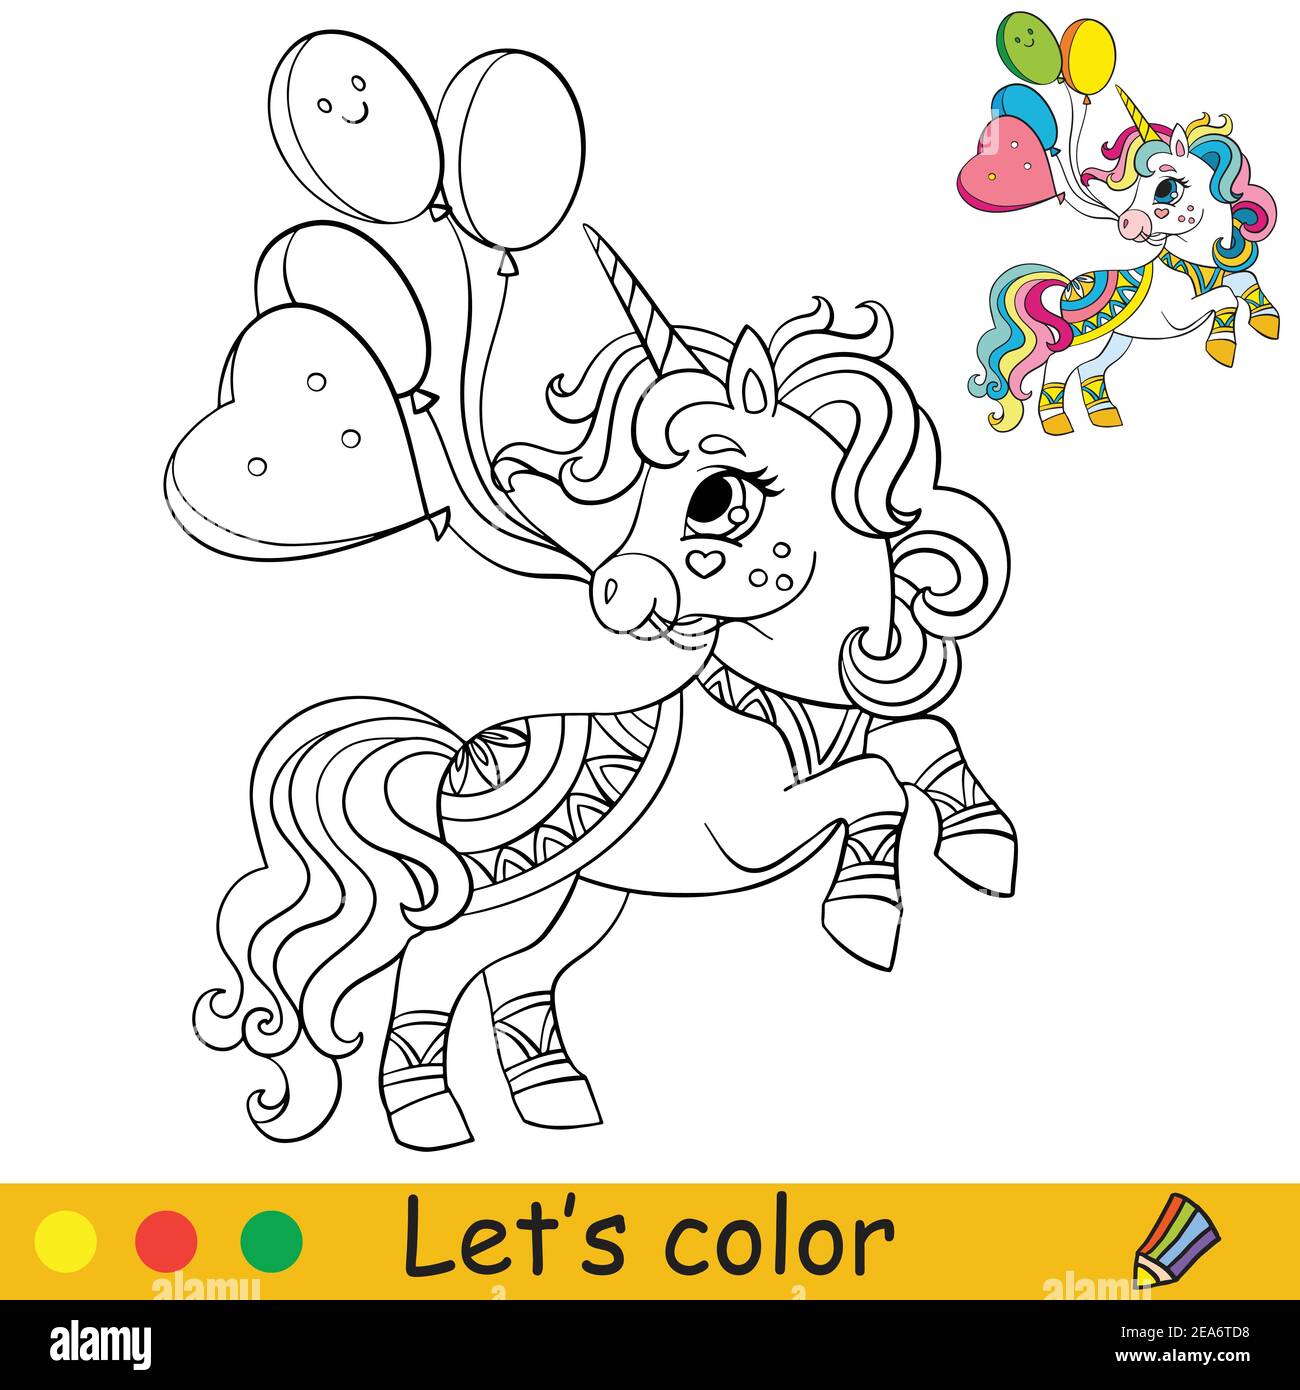 Cute party unicorn with balloons. Coloring book page with colorful